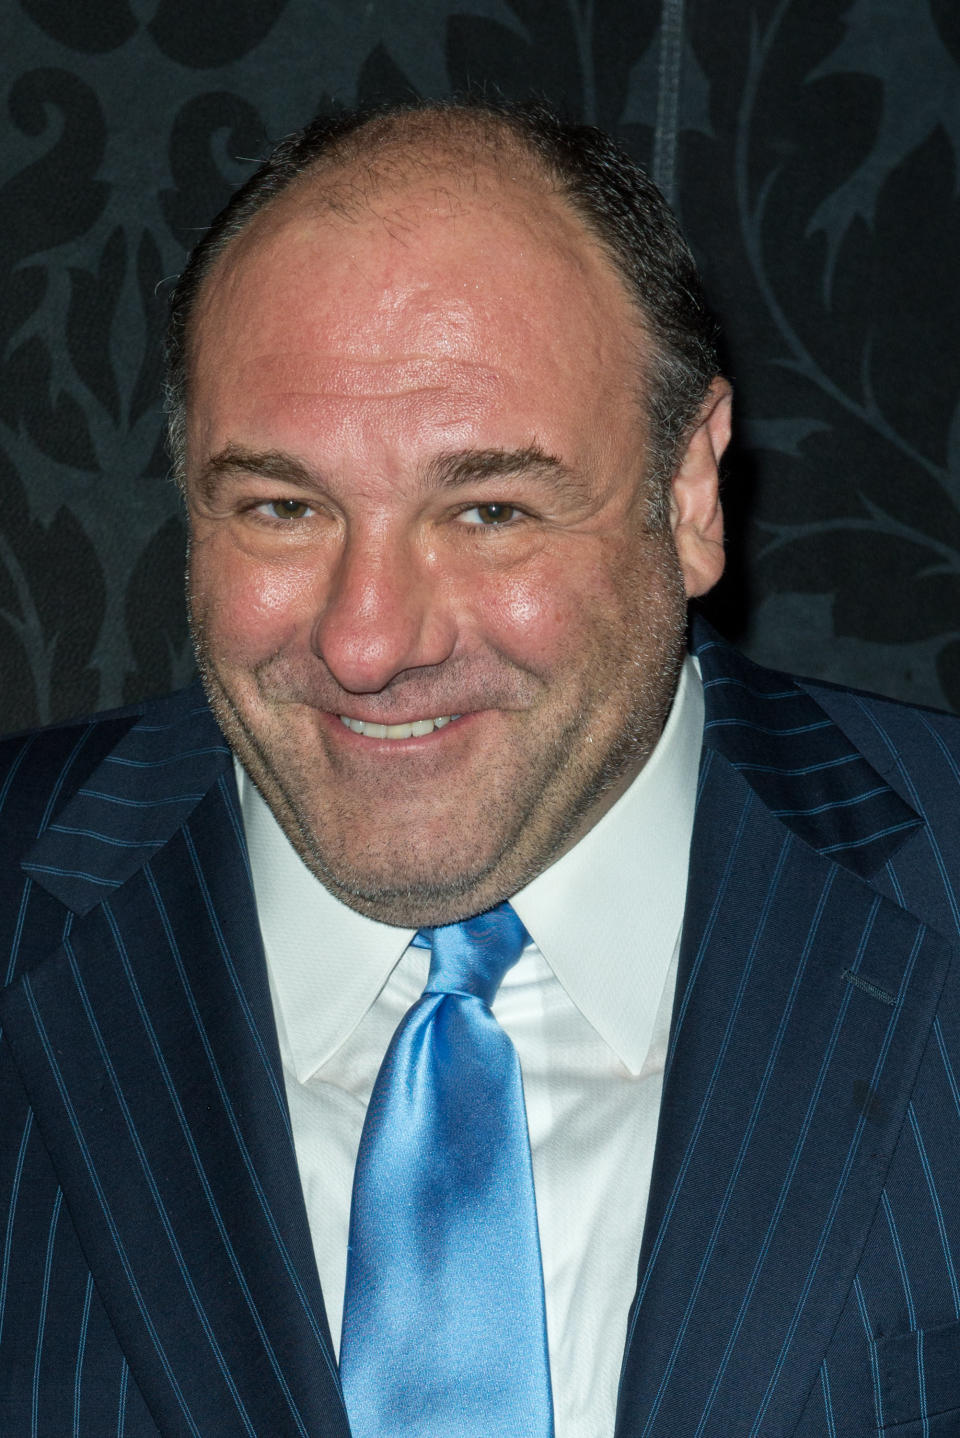 James Gandolfini, best known for his role on "The Sopranos," died in Italy on June 19, 2013 after suffering from a heart attack.